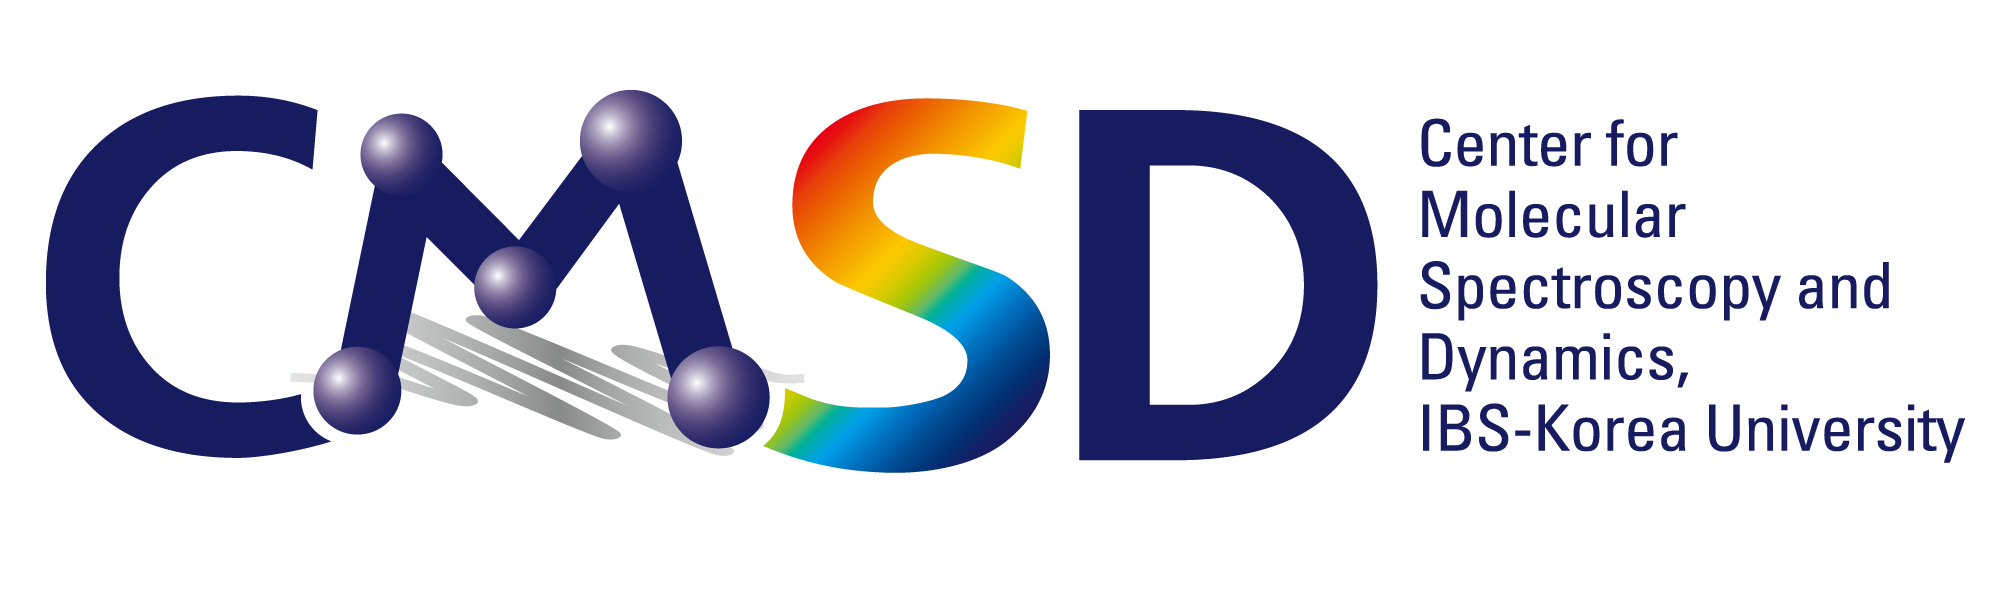 New logo with transparent background